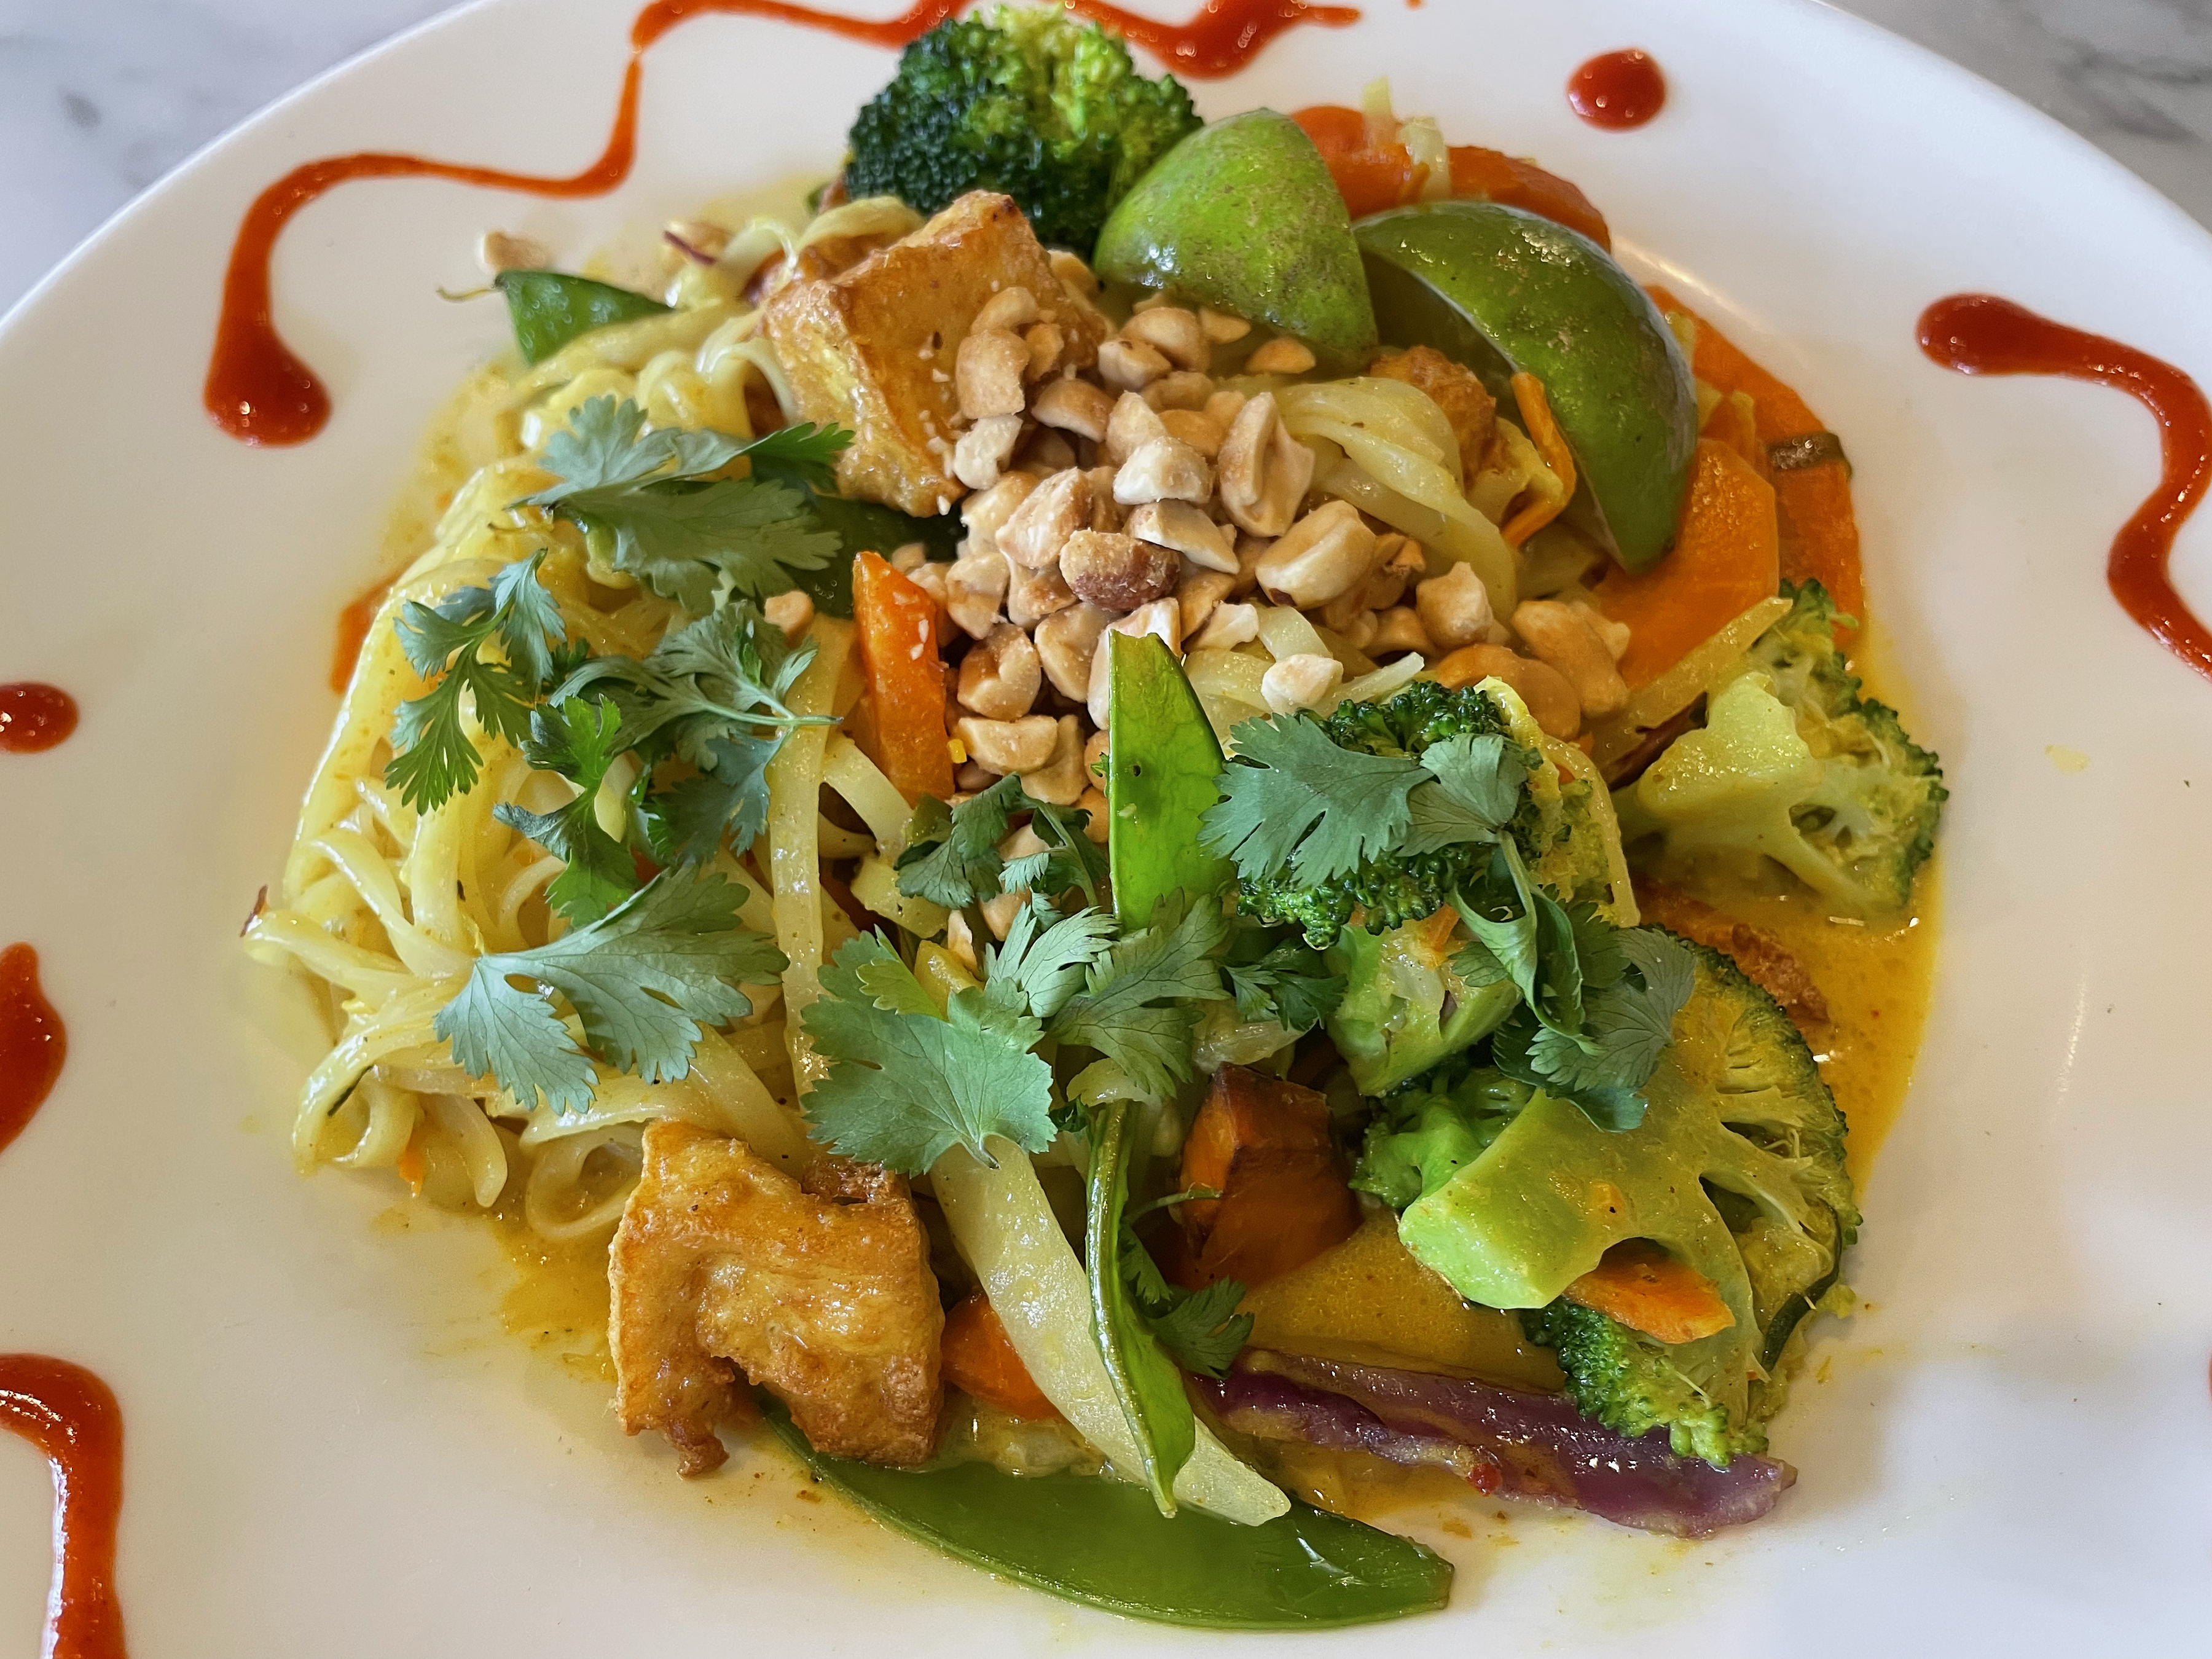 Eat your vegetables and like it: Uptown's gently spicy curried rice noodles are packed with perfectly prepared veggies and tofu.